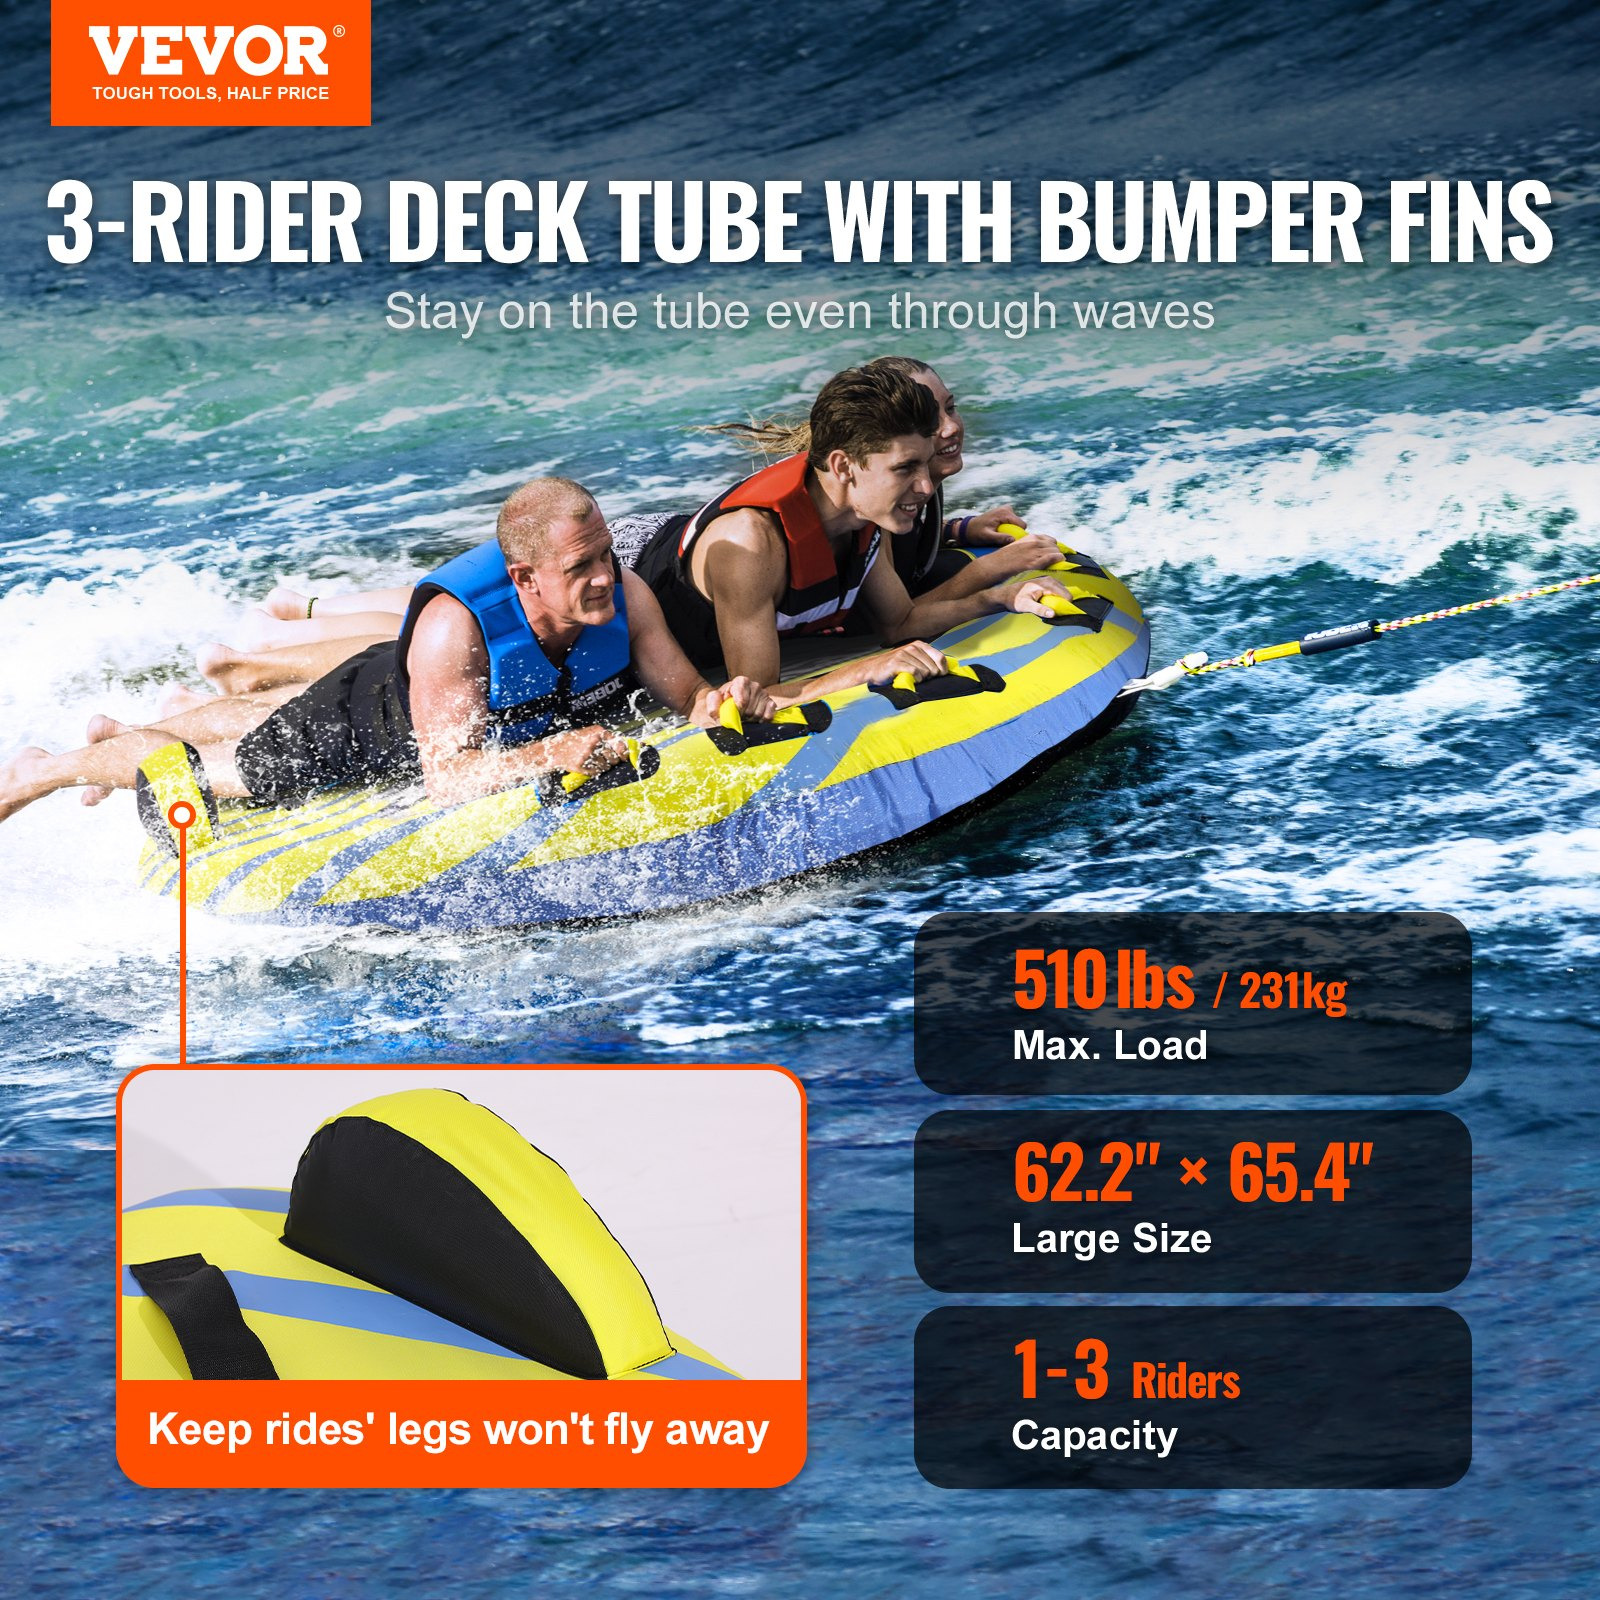 VEVOR Towable Tube for Boating, 1-3 Riders Inflatable Towable Tube with Bumper F